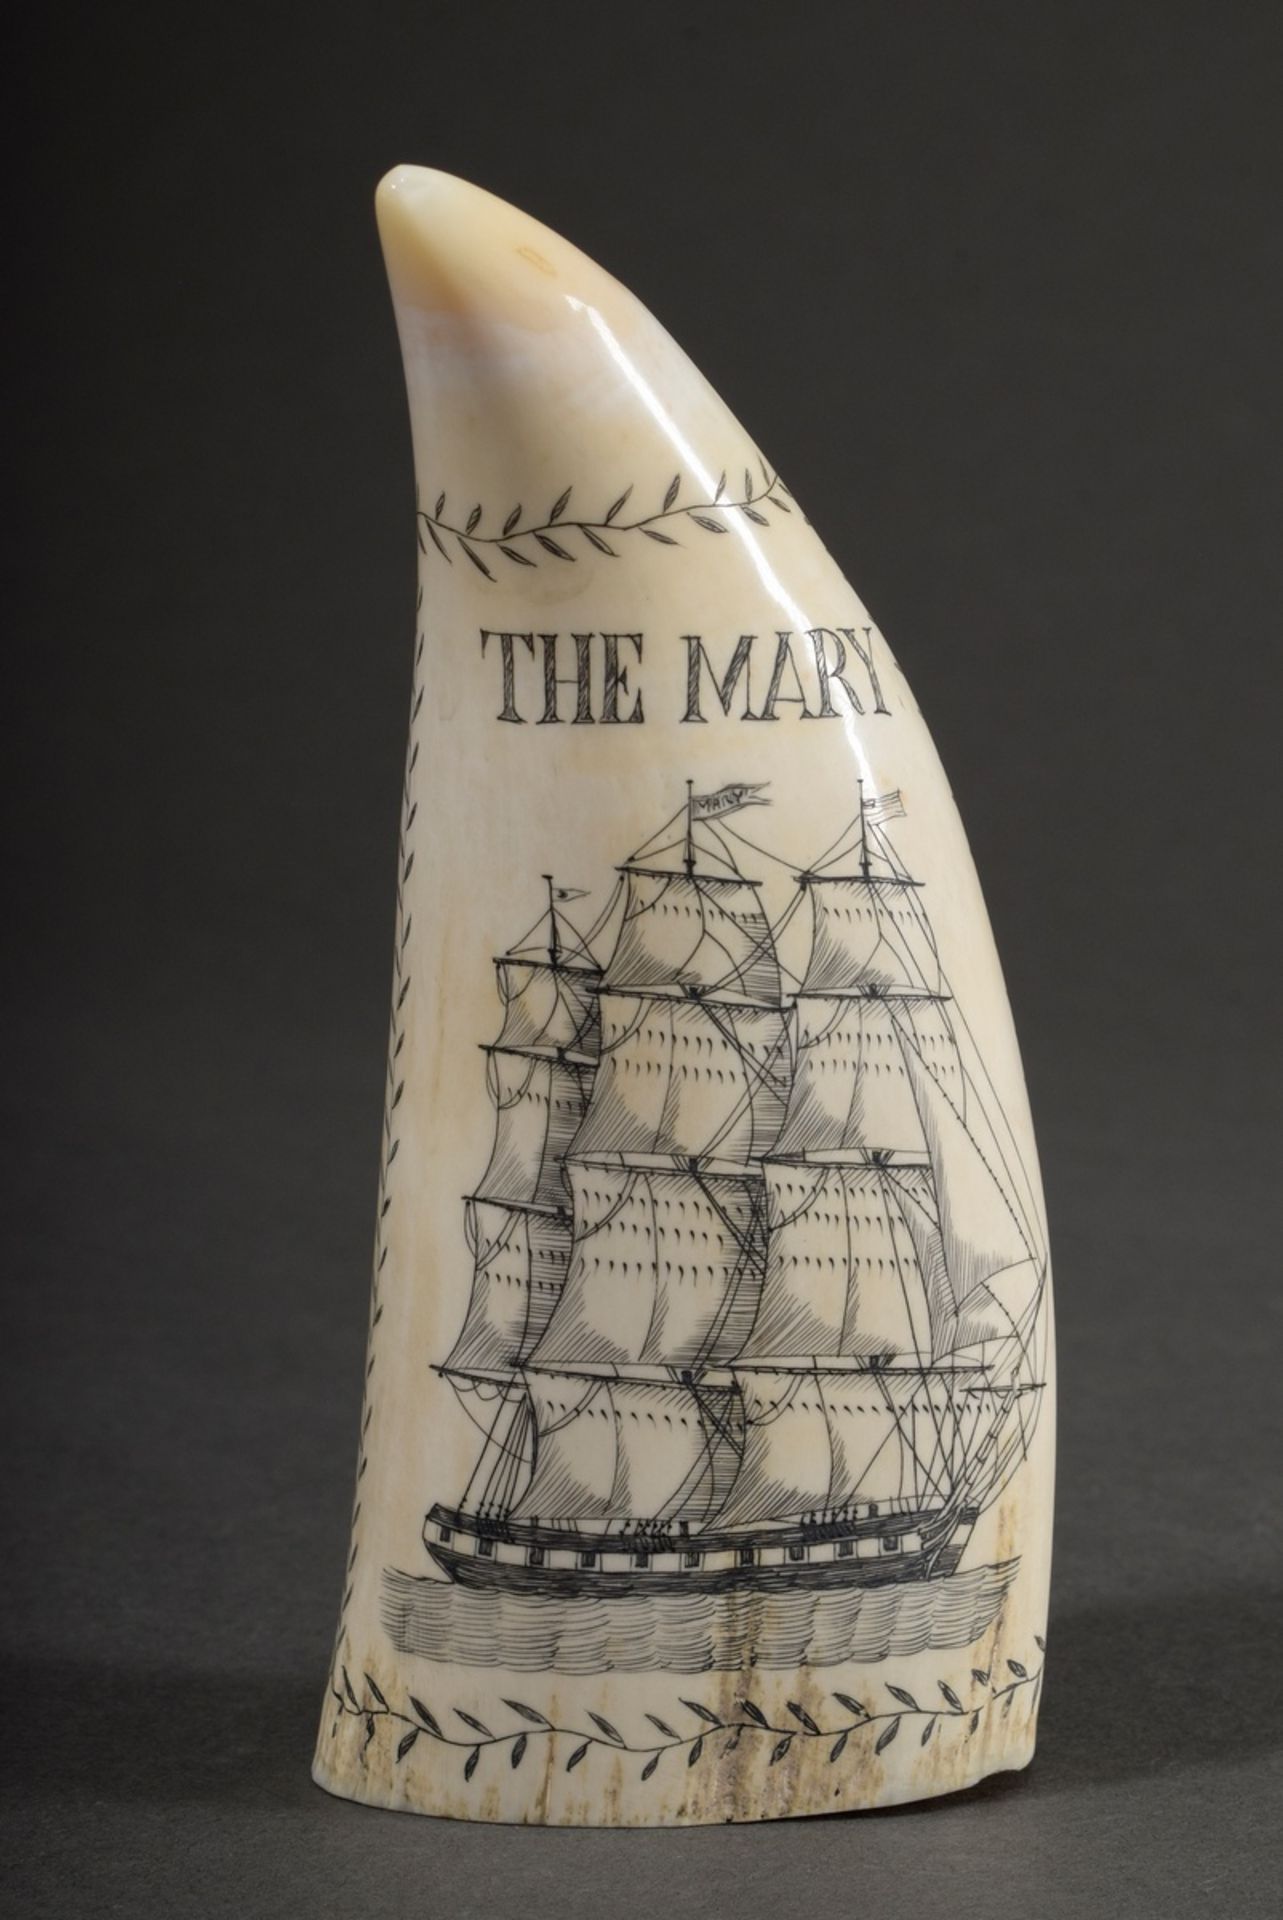 Scrimshaw "The Mary - Capt. John Roe", America, east coast, probably 19th c., 311g, h. 13.5cm, some - Image 2 of 3